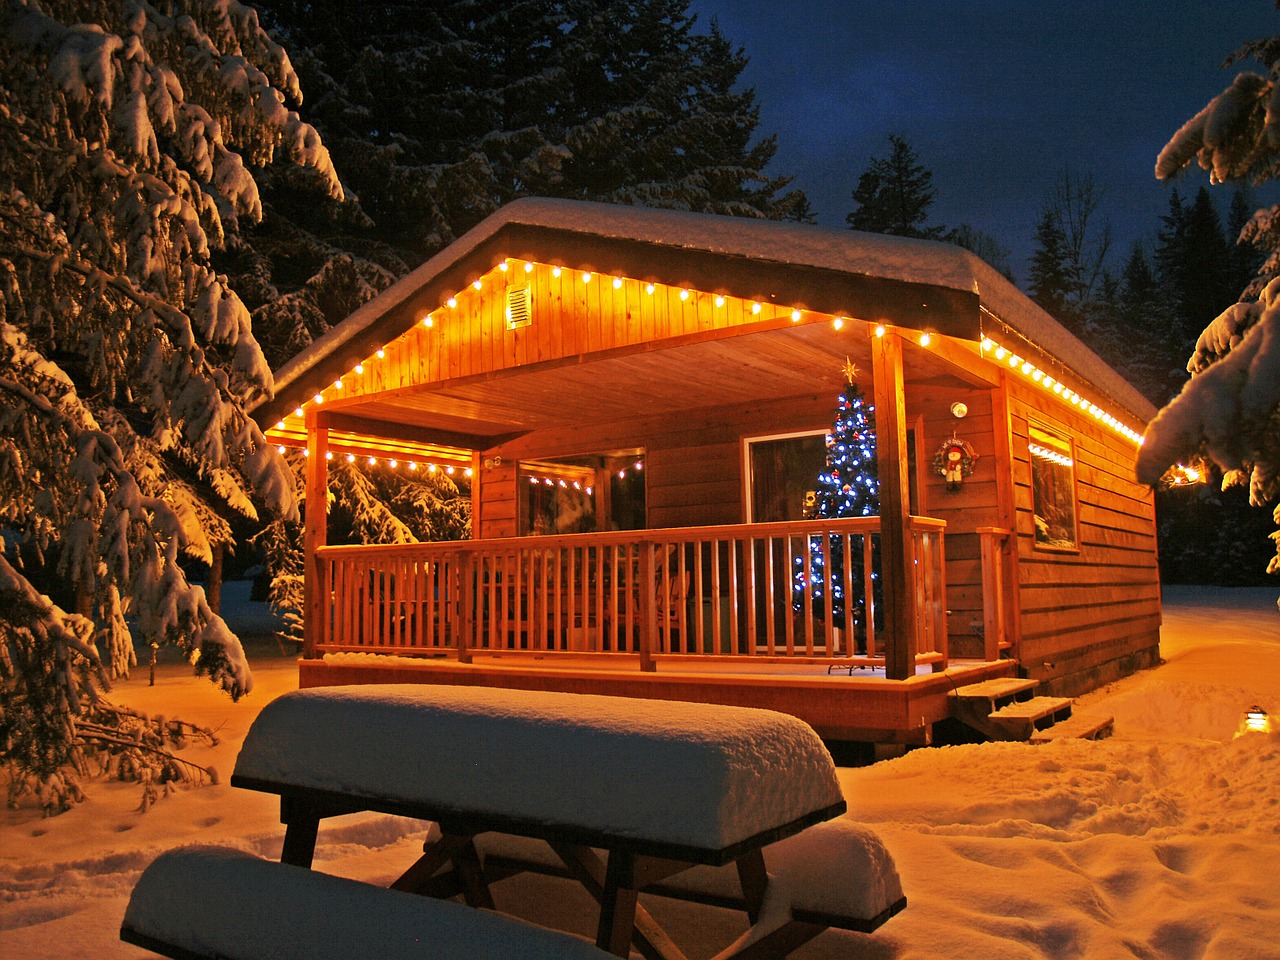 Hocking Hills Romantic Cabin Rentals  Buffalo Cabins and Lodges